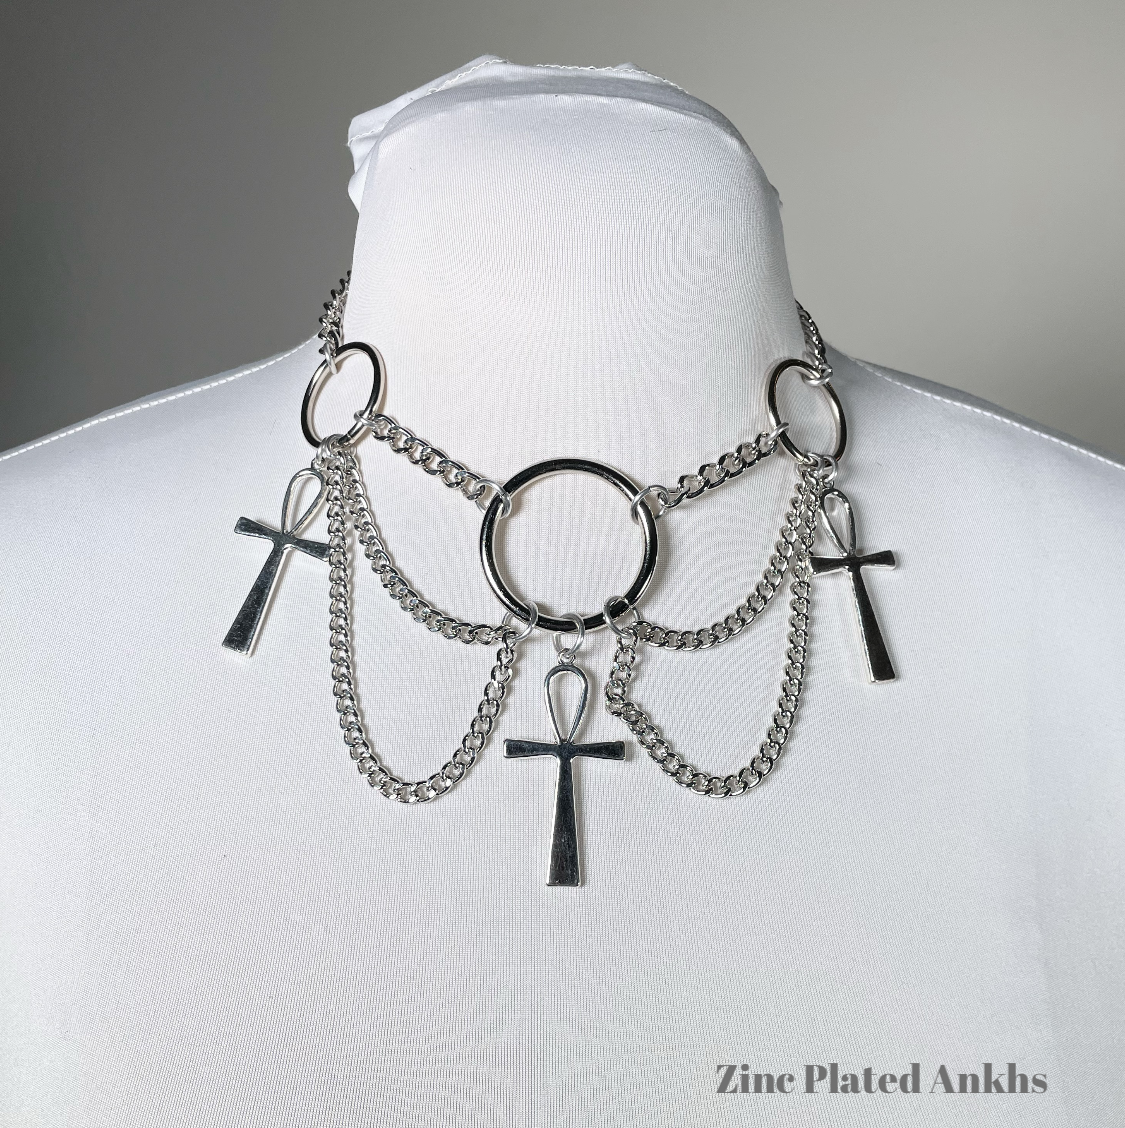 The Occultist Necklace